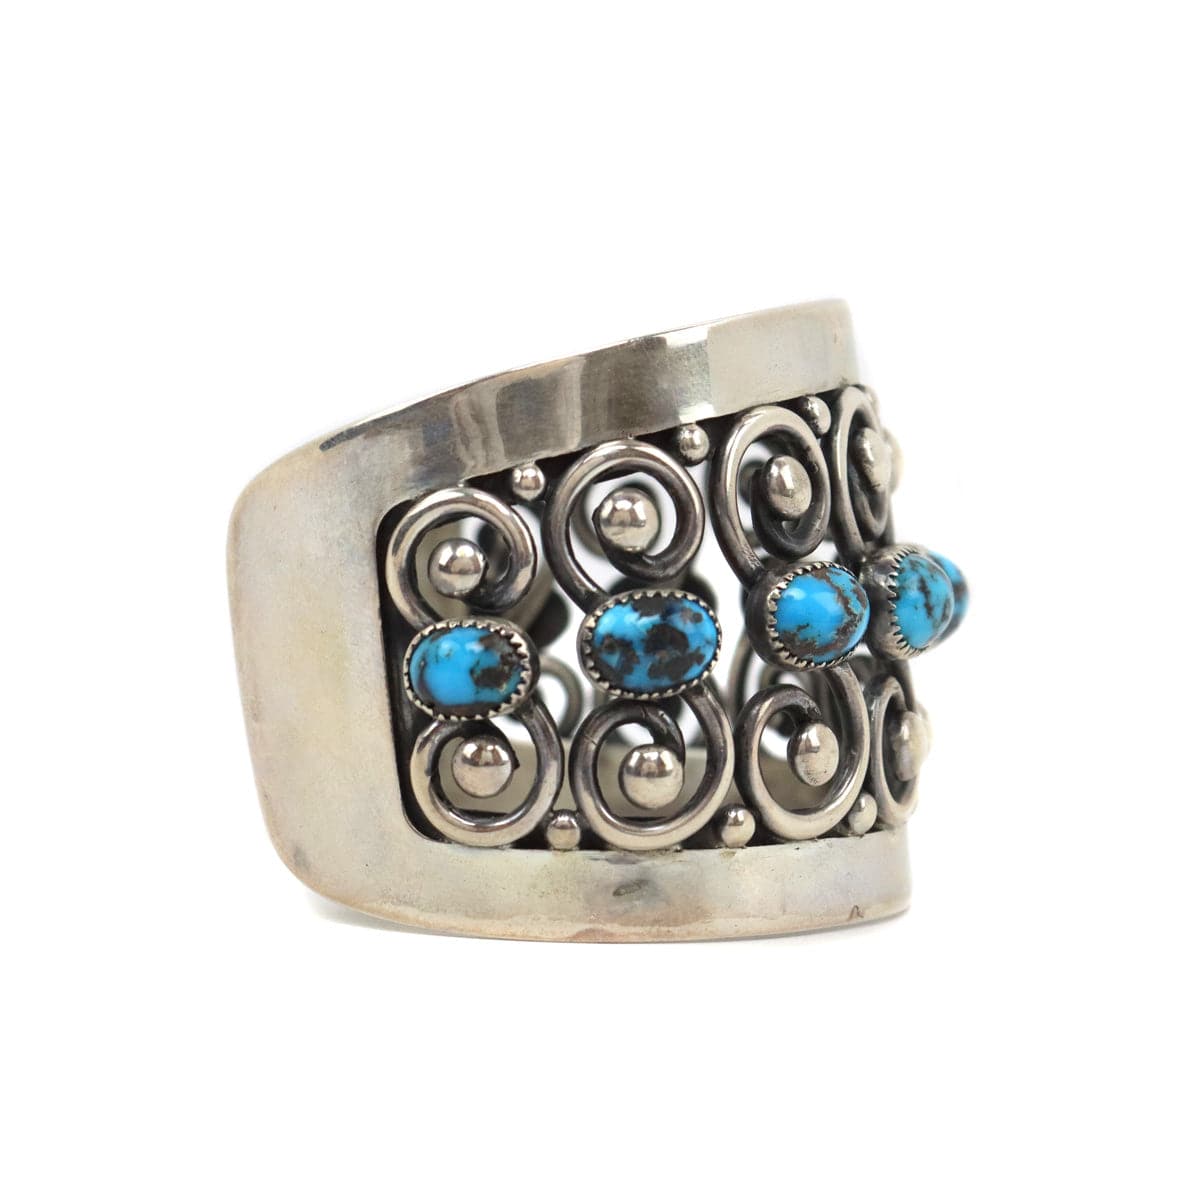 Frank Patania Sr. (1898-1964) - Persian Turquoise and Sterling Silver Bracelet c. 1950s, size 7.25 (J91699-1022-020) 1